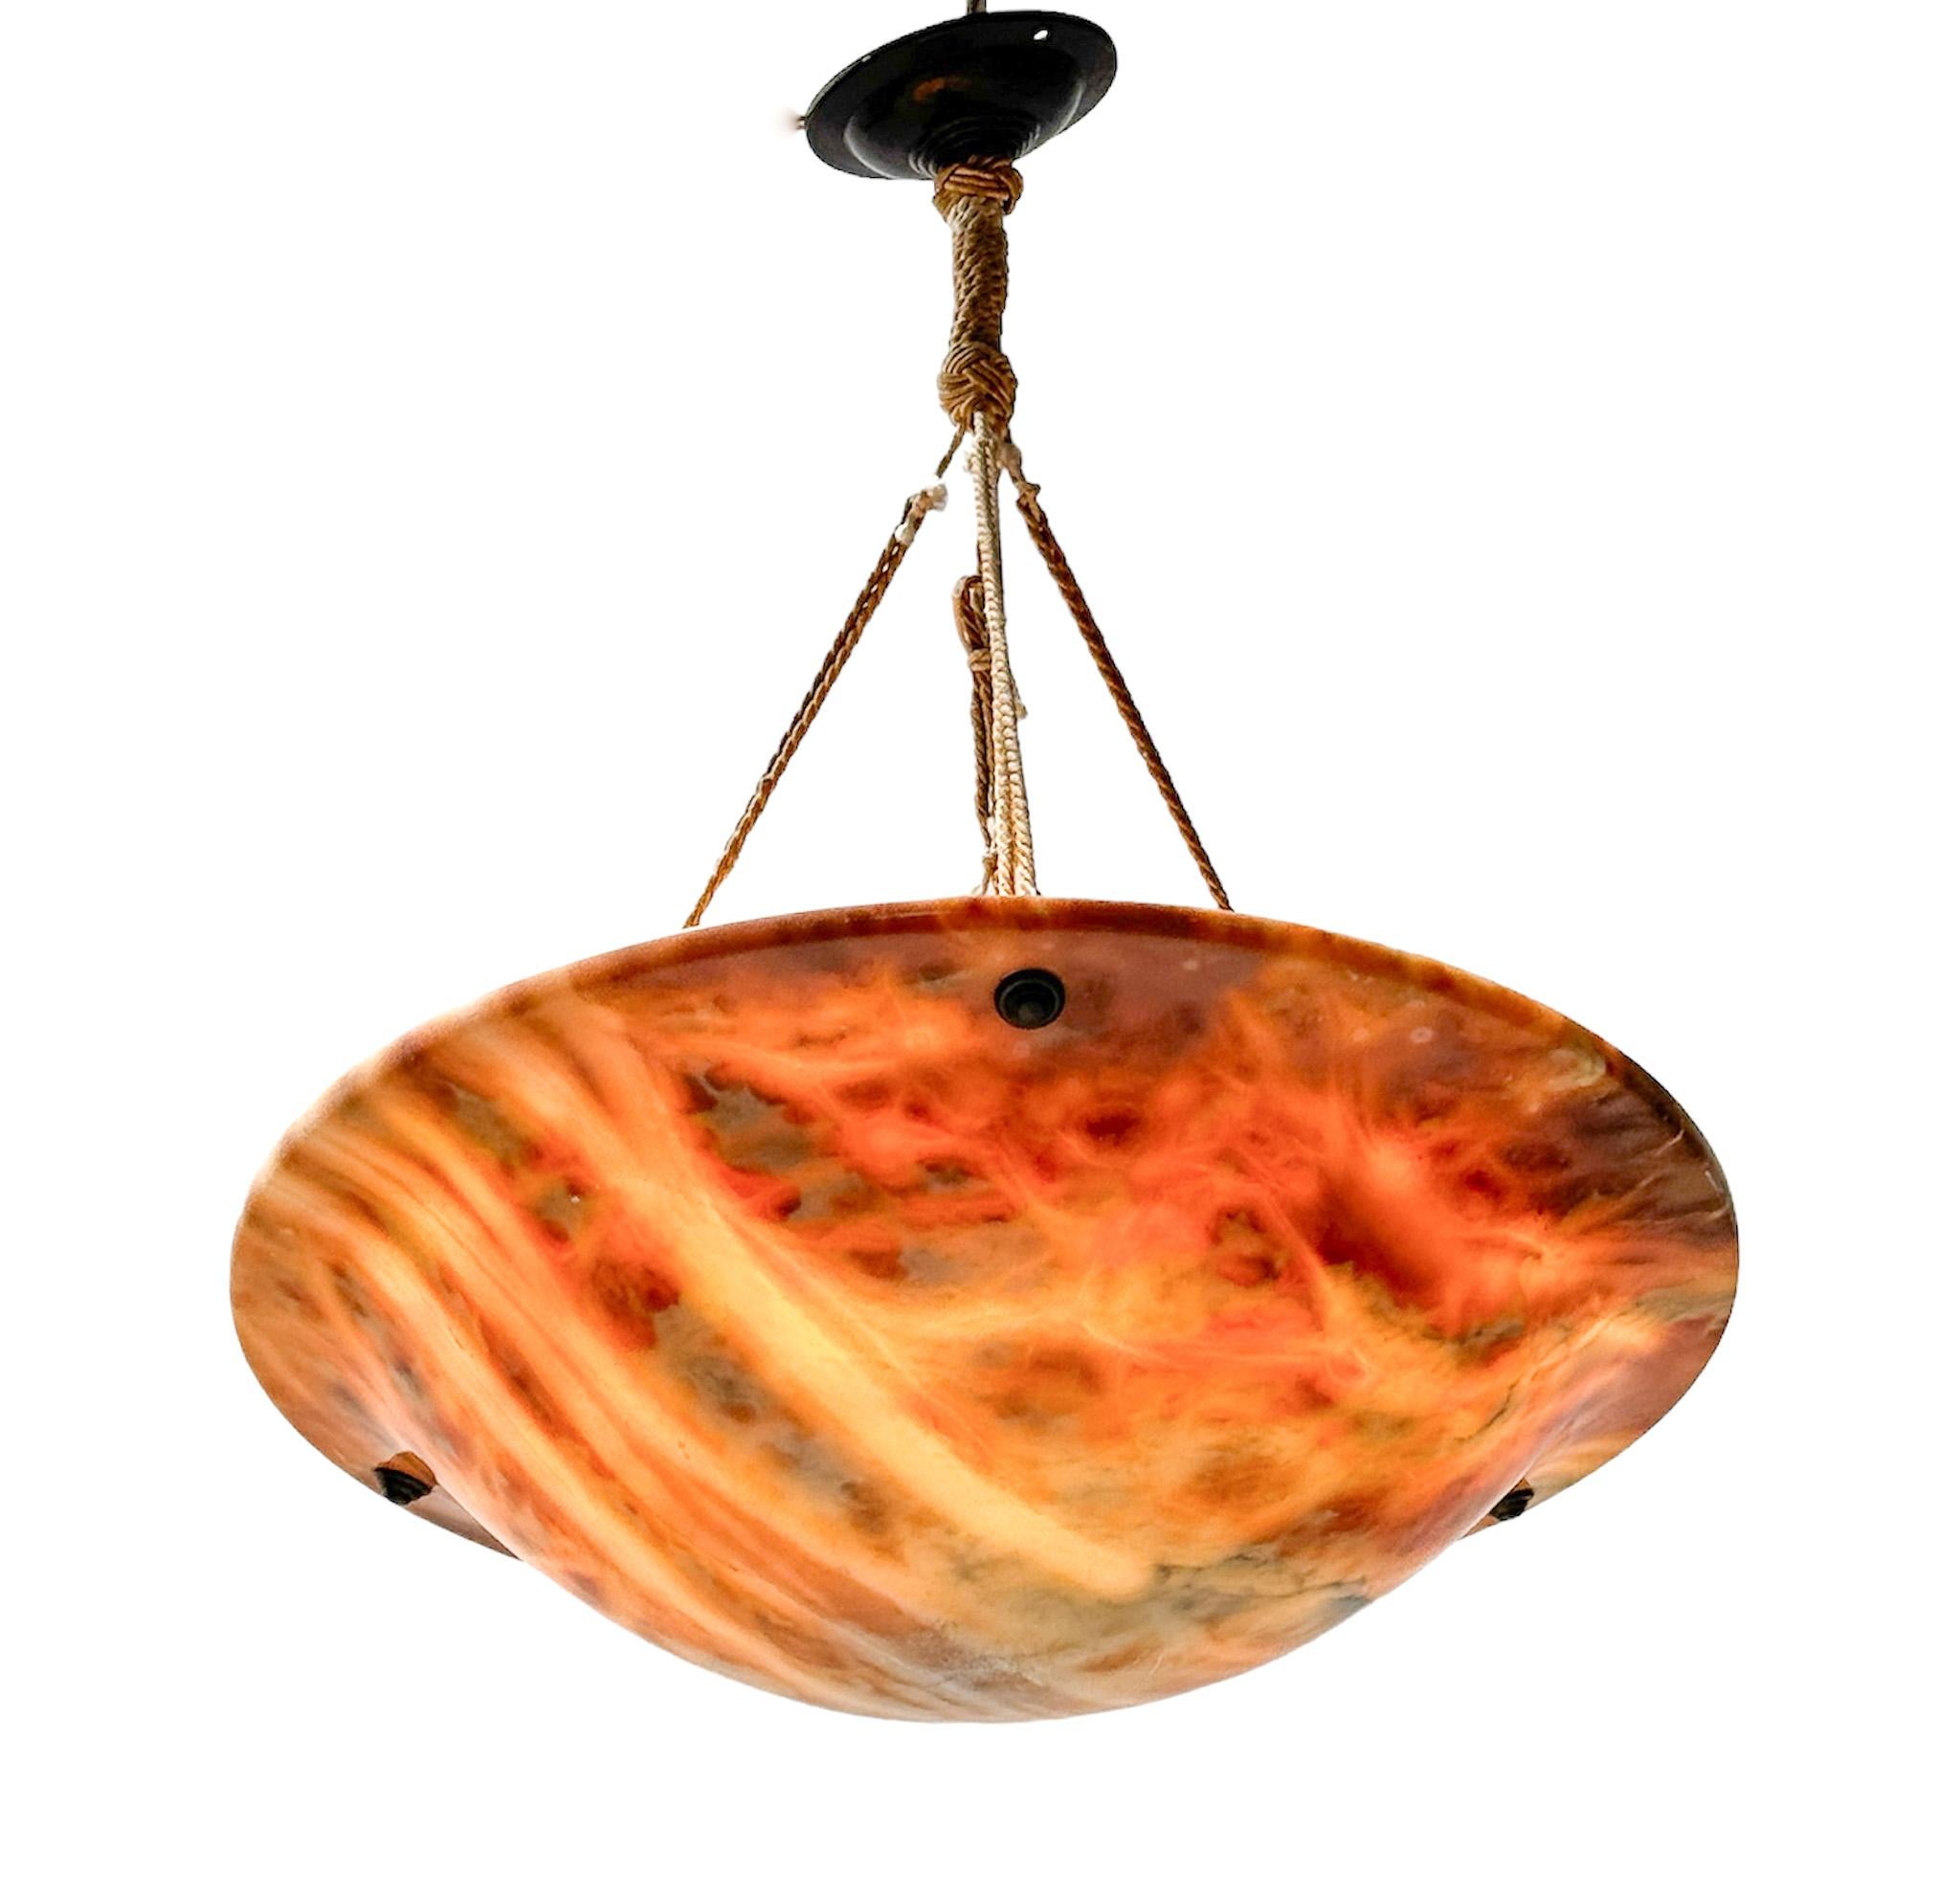 Stunning and rare Art Nouveau pendant light.
Striking Dutch design from the 1900s.
Original multi-colored alabaster shade with original brass canopy and rope cords.
This wonderful Art Nouveau pendant light is in very good original condition with